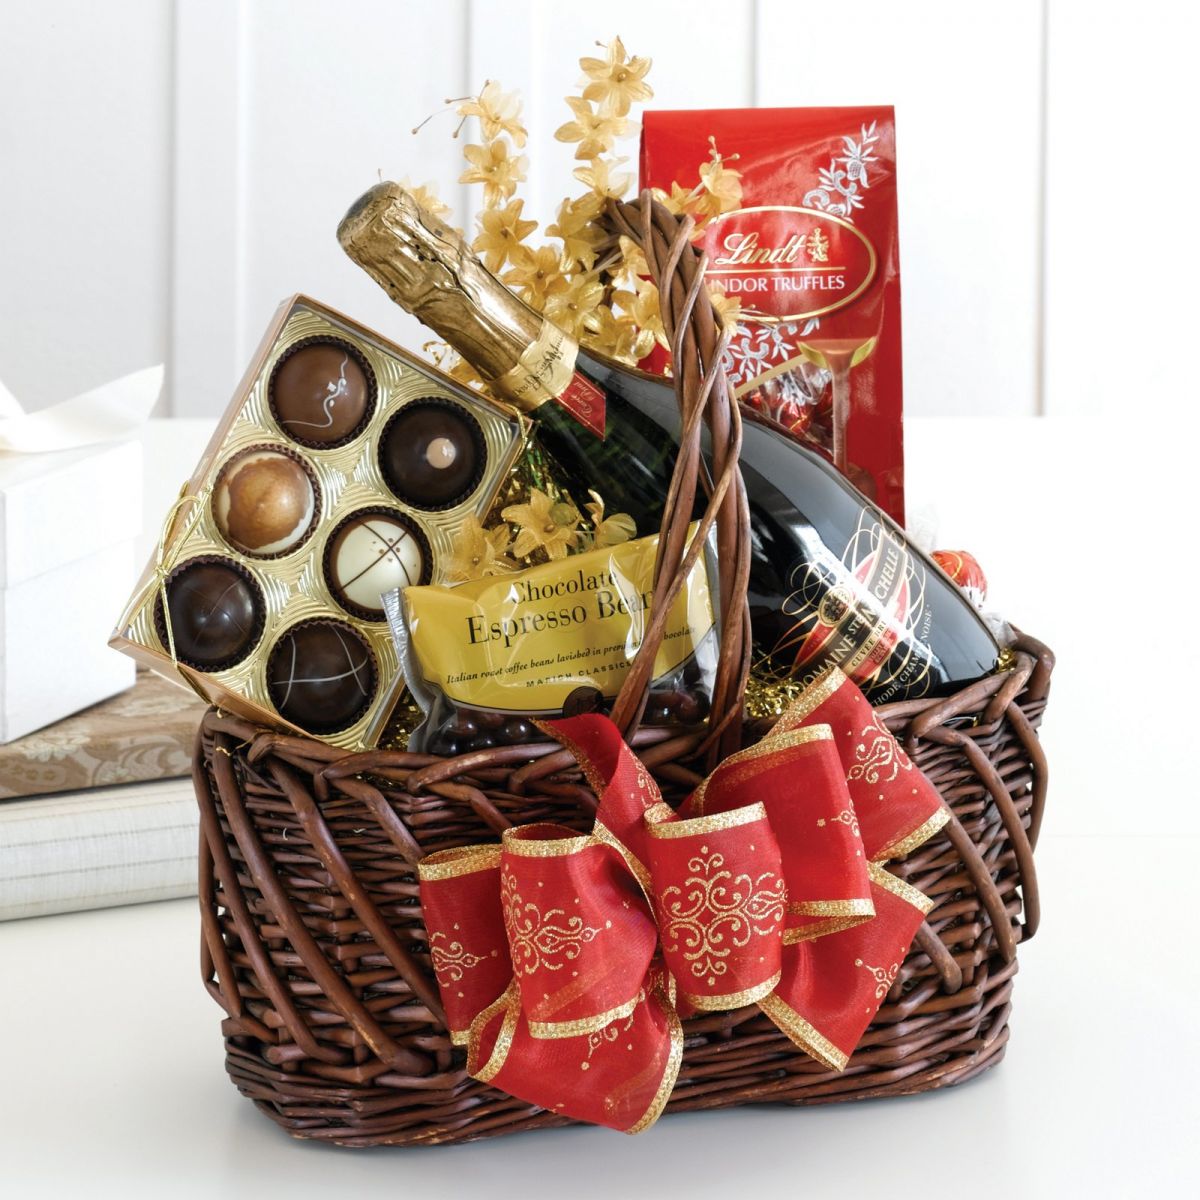 10 Hilarious Arts And Crafts Gift Basket Ideas for Any Cheese Lover